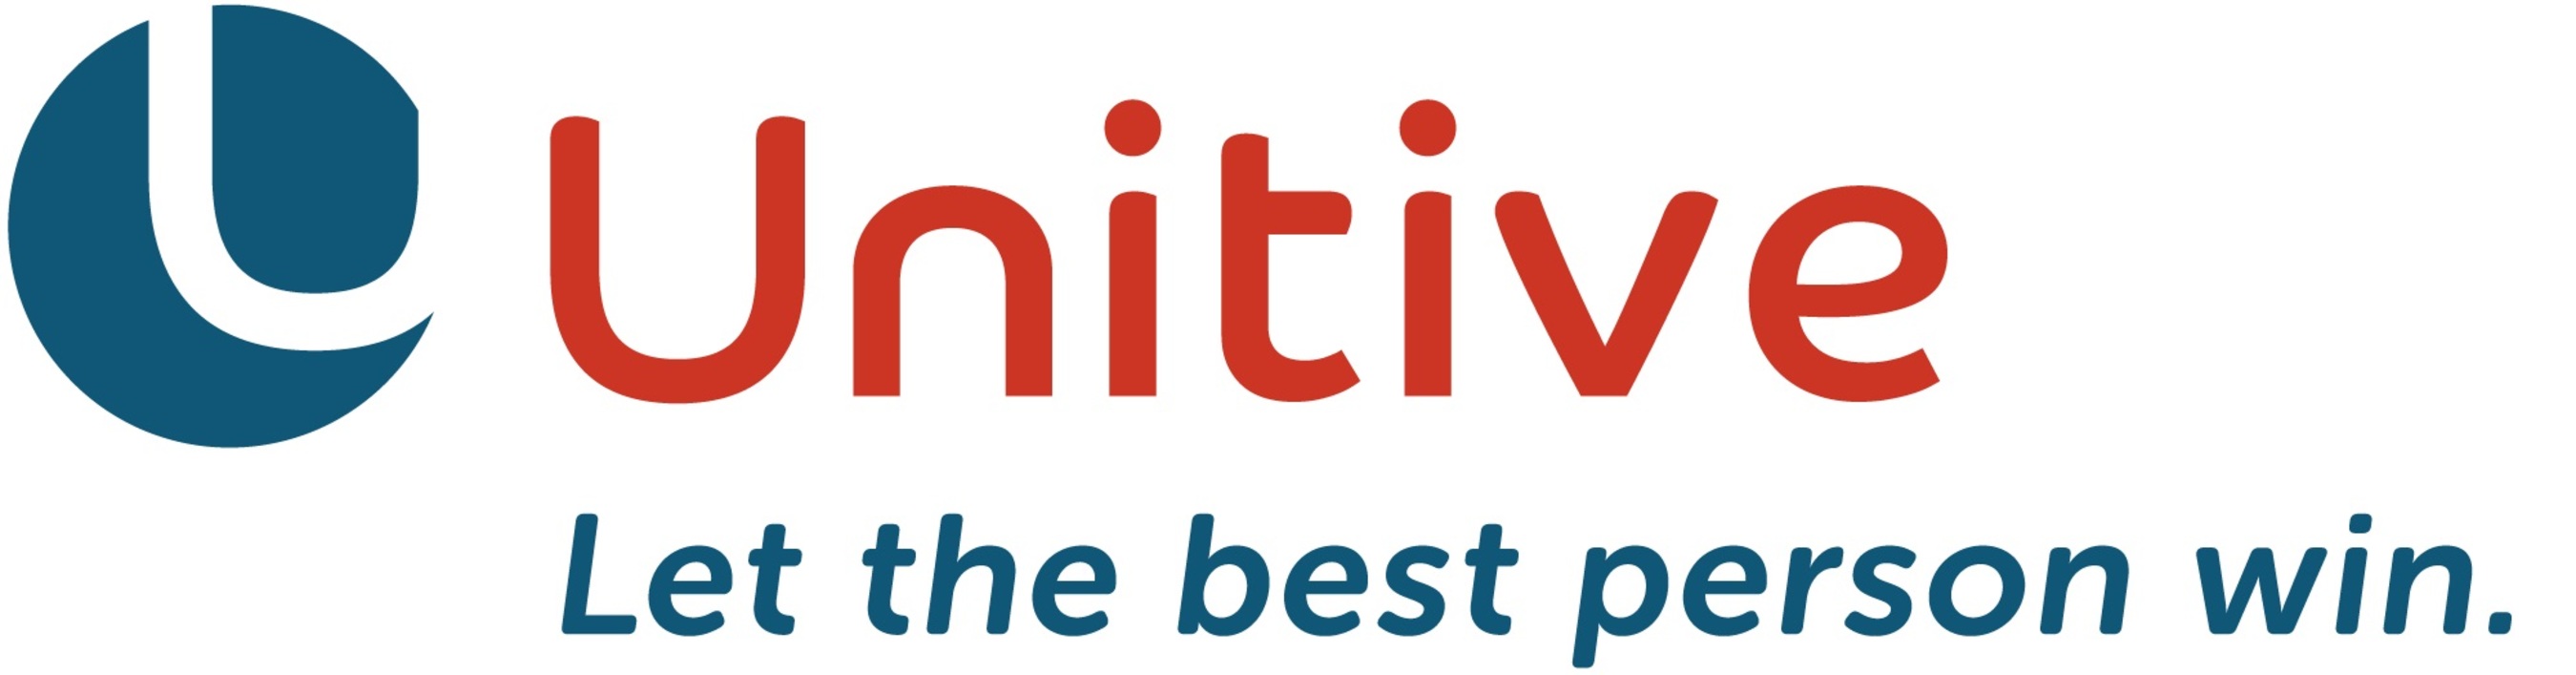 Unitive is a technology solution for full talent activation, helping corporations build diverse, innovative, productive teams. Unitive goes beyond training and reinforces behavioral change in real-time. Unitive transforms theoretical ideas about unconscious bias into pragmatic solutions that build stronger teams.